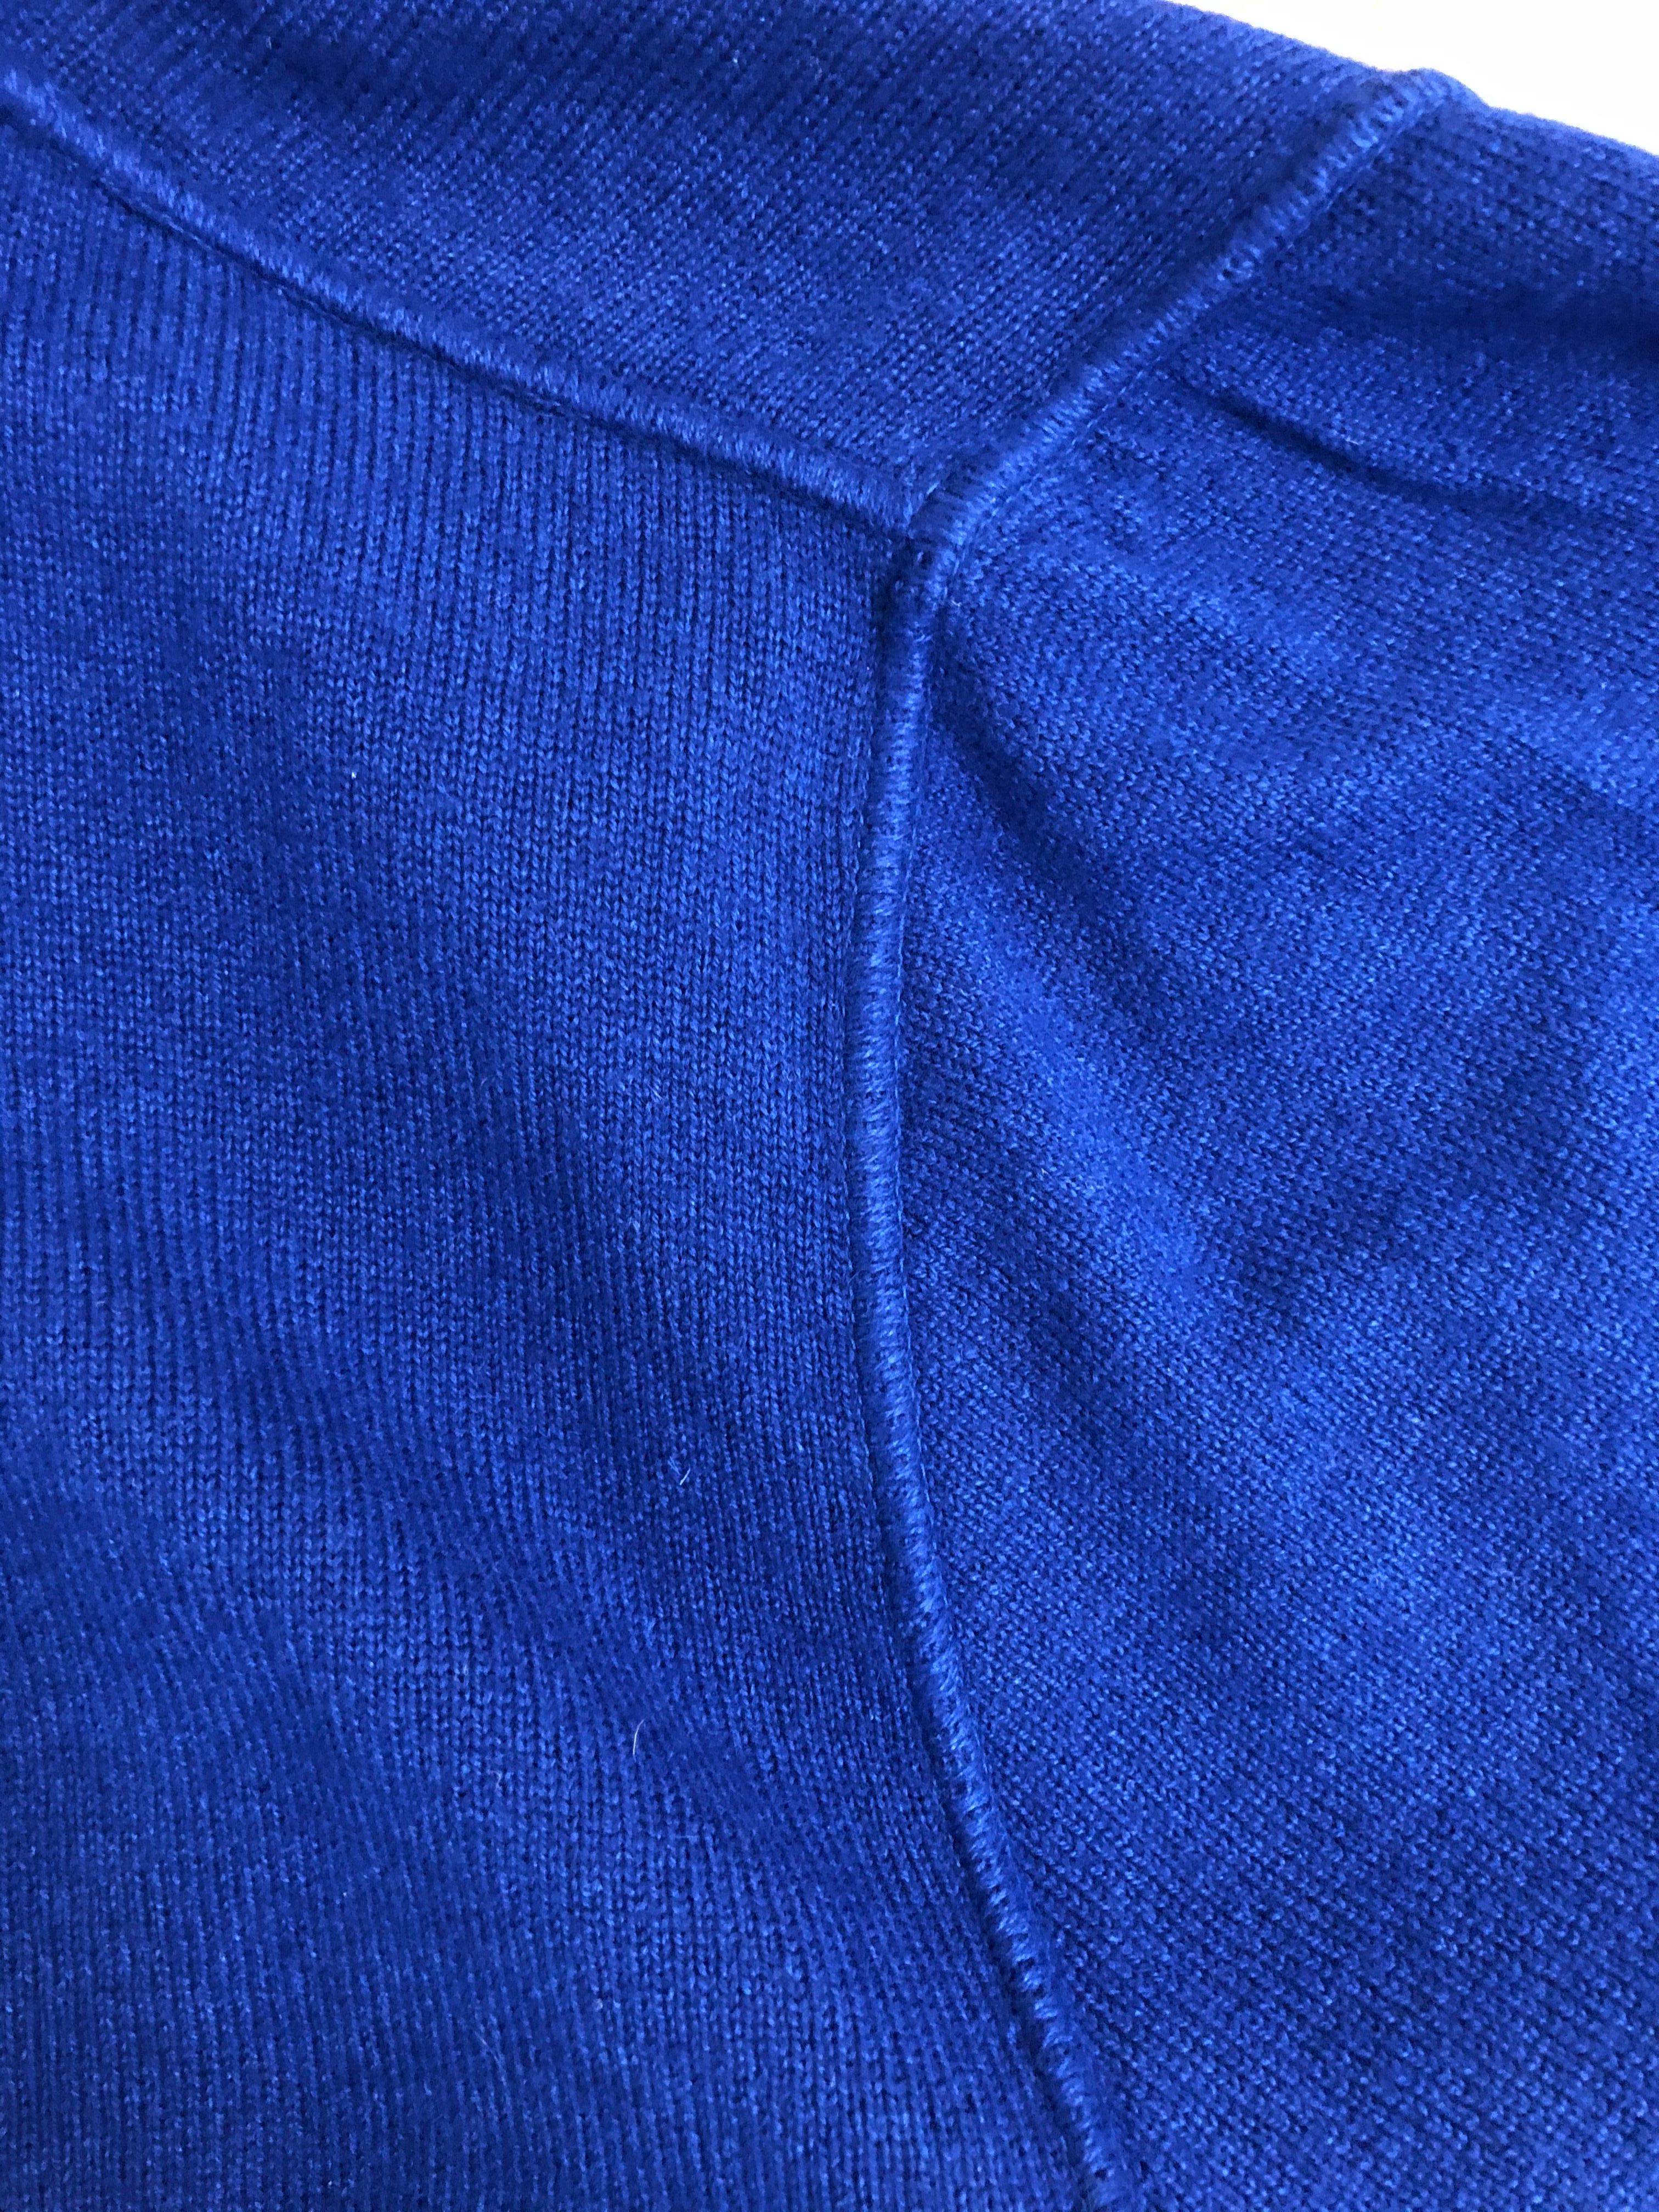 Brunello Cucinelli Royal Blue High Necked Cashmere and Silk Sweater M+ 1